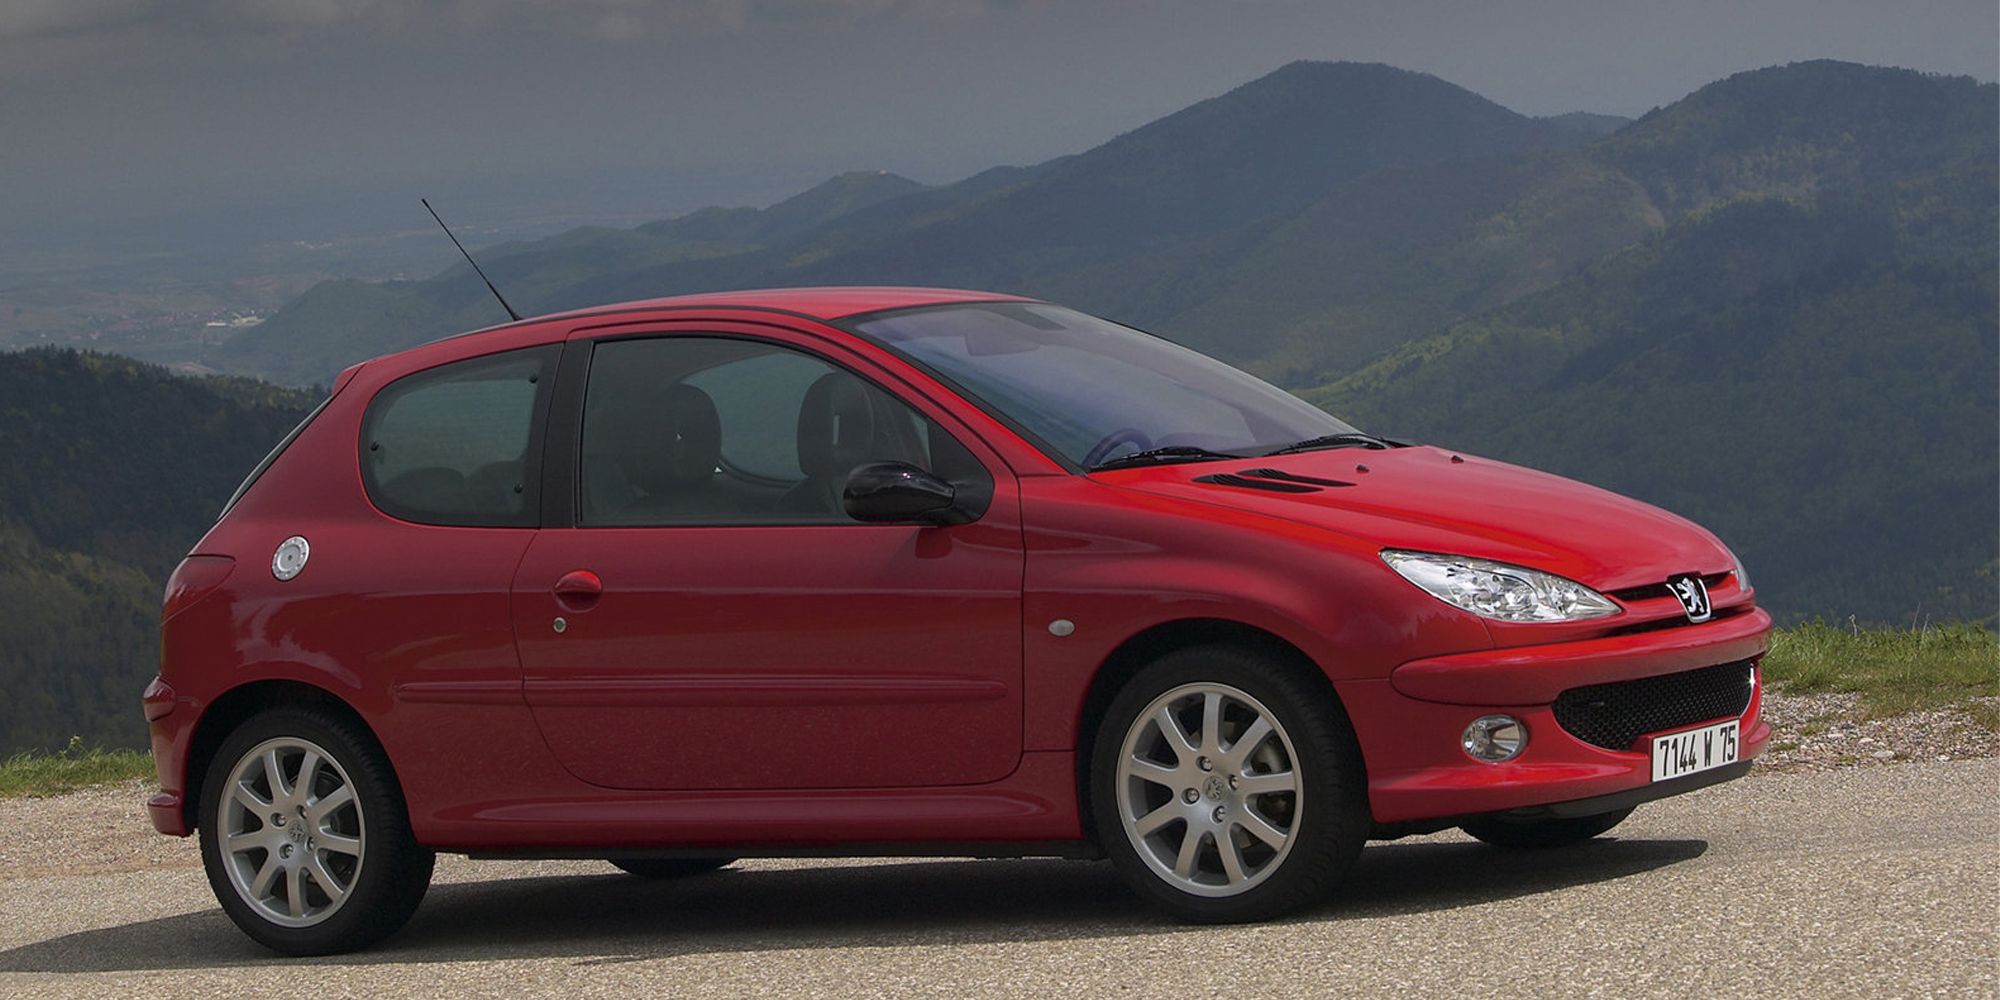 This Is What Makes The Peugeot 206 Awesome